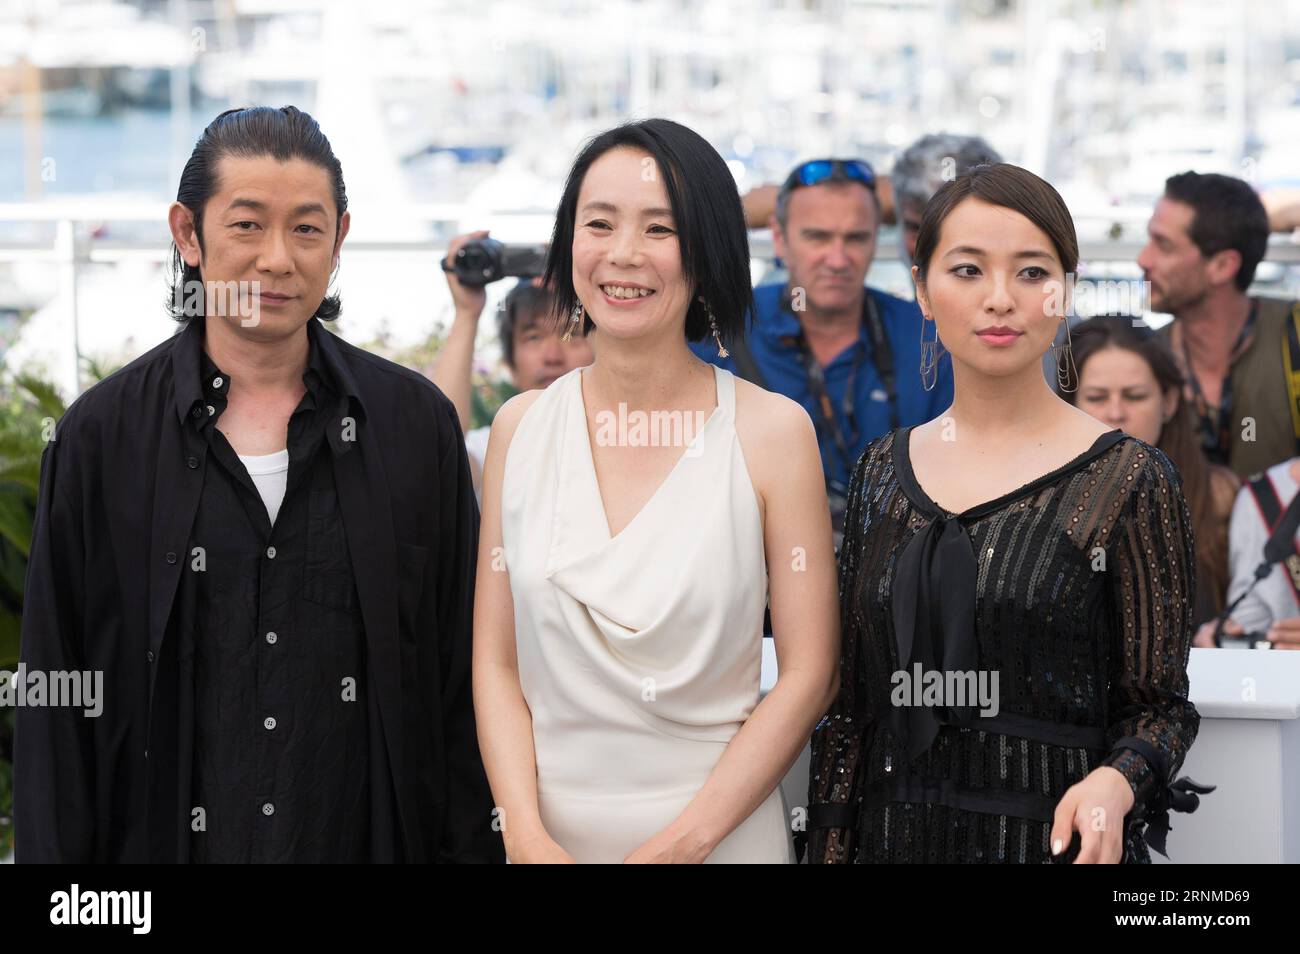 (170523) -- CANNES, May 23, 2017 -- Actor Masatoshi Nagase, actresses Misuzu Kanno and Atame Misaki (L-R) pose for a photocall of the film Hikari (Radiance) during the 70th Cannes Film Festival at Palais des Festivals in Cannes, France, on May 23, 2017. ) (dtf) FRANCE-CANNES-70TH CANNES FILM FESTIVAL-HIKARI XuxJinquan PUBLICATIONxNOTxINxCHN   Cannes May 23 2017 Actor Masatoshi NAGASE actresses  Kanno and Atame Misaki l r Pose for a photo call of The Film Hikari Radiance during The 70th Cannes Film Festival AT Palais the Festivals in Cannes France ON May 23 2017 dtf France Cannes 70th Cannes Fi Stock Photo